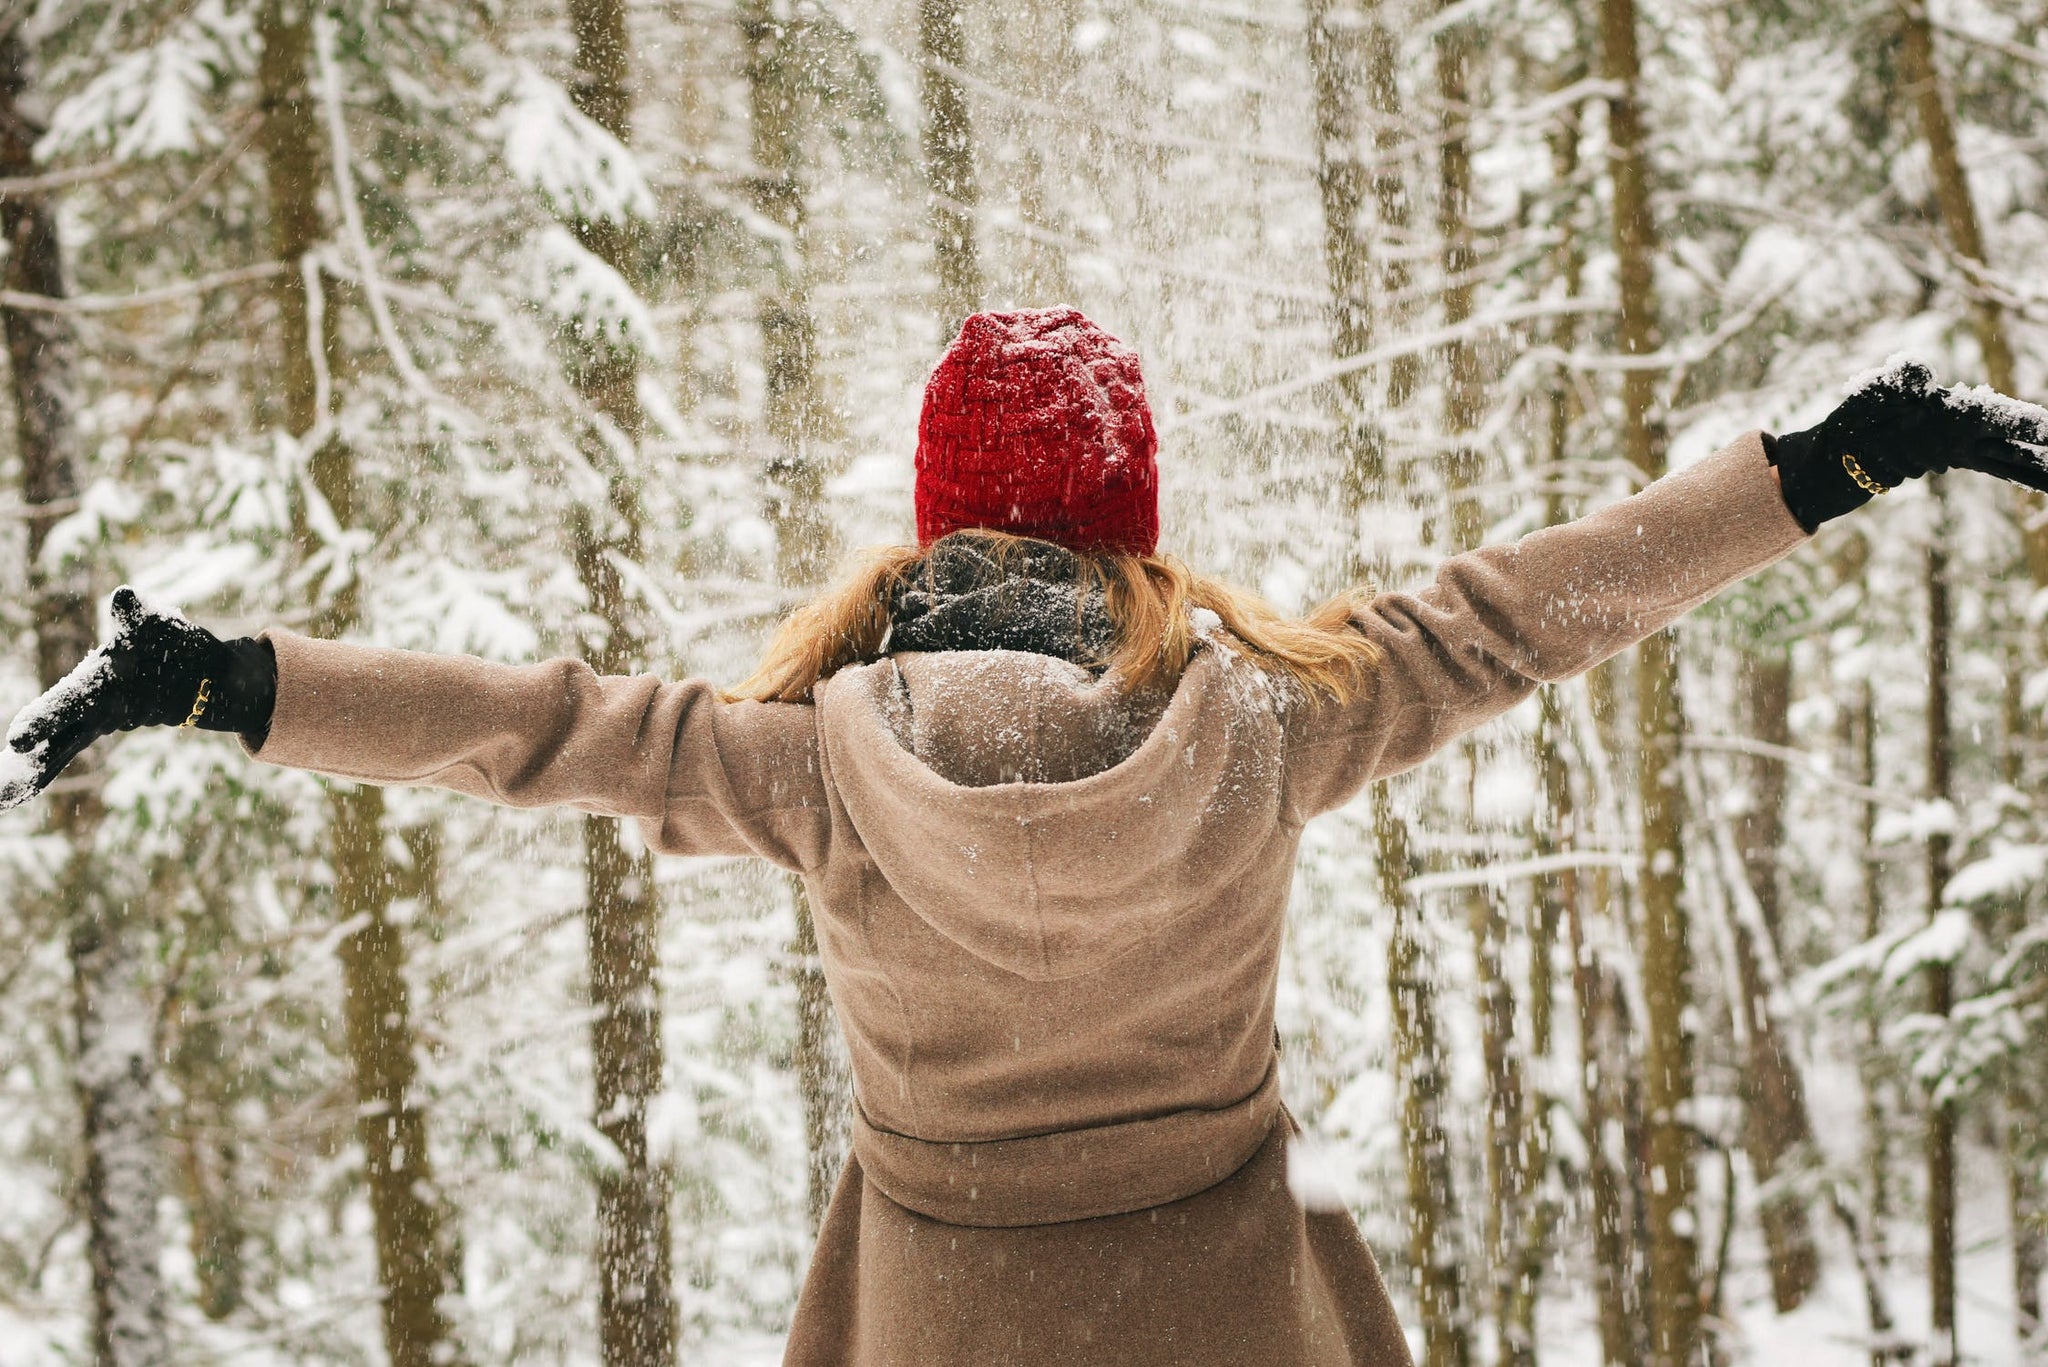 3 Recommended Team Activities to Do Before Winter is Gone